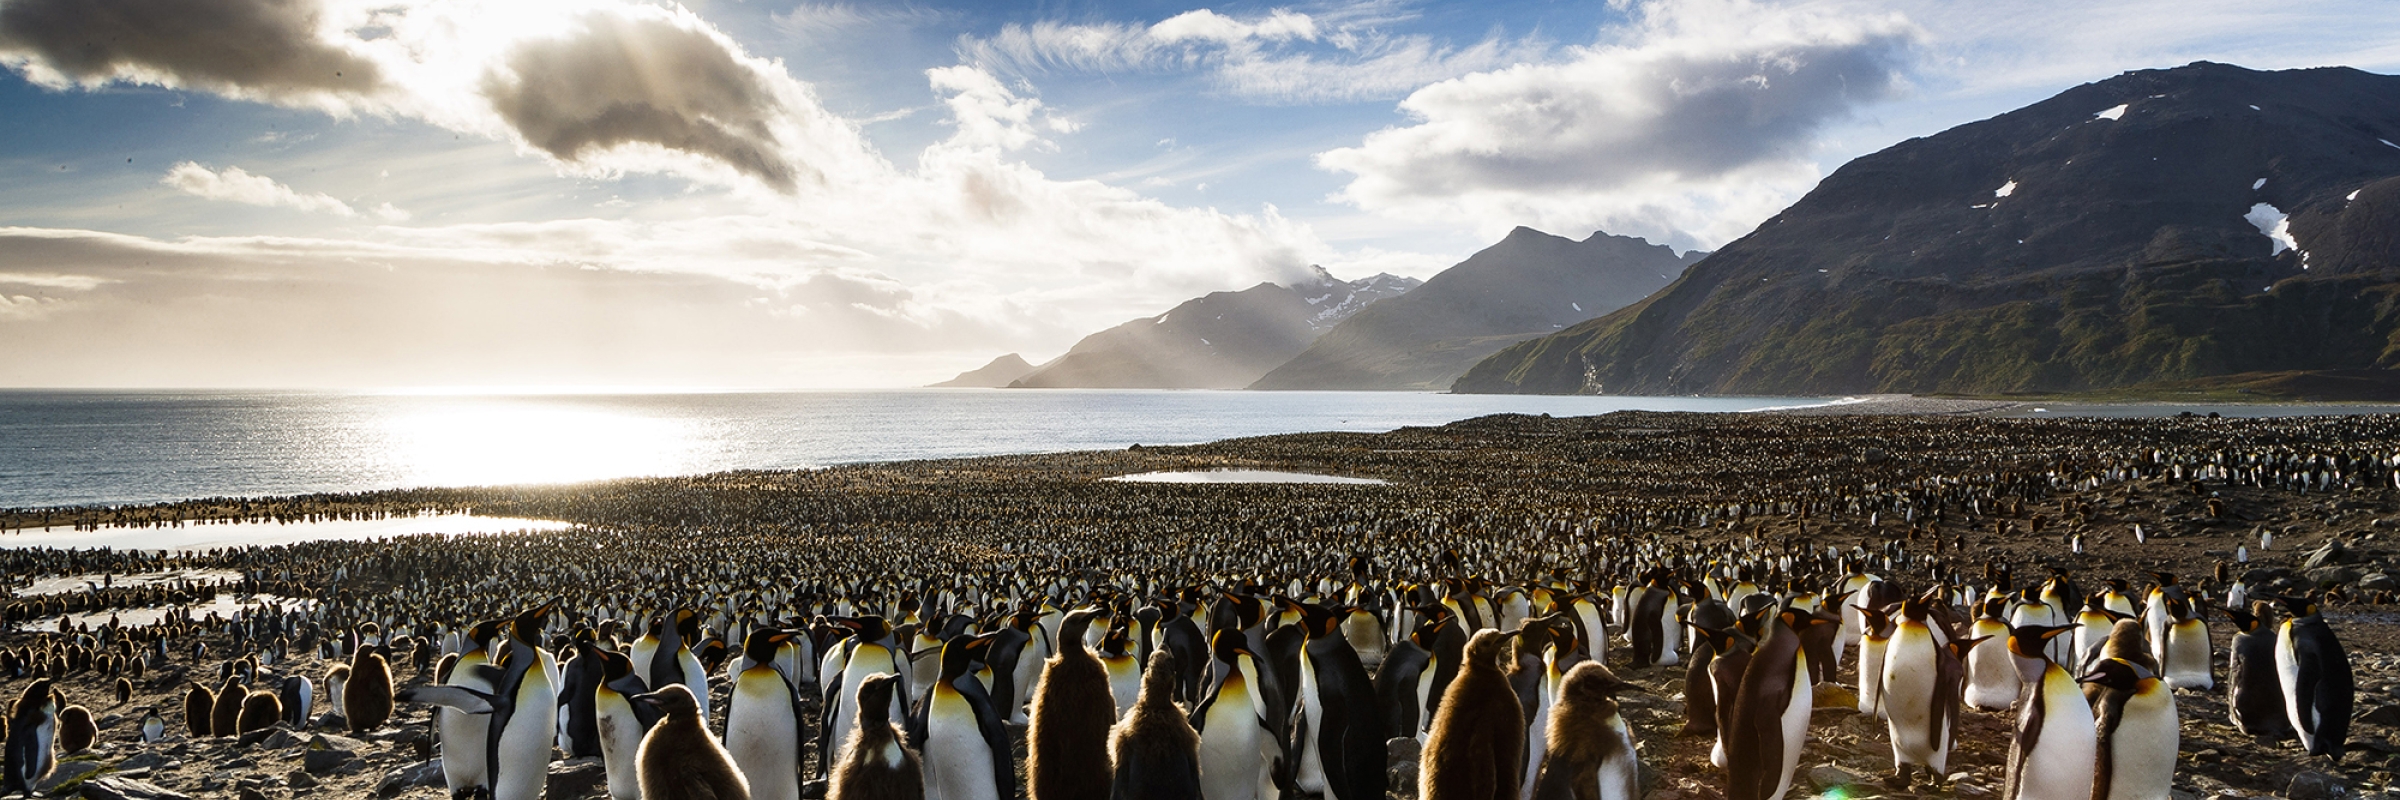 King penguin colony at St Andrews Bay, South Georgia. Photo by Nicky Souness.